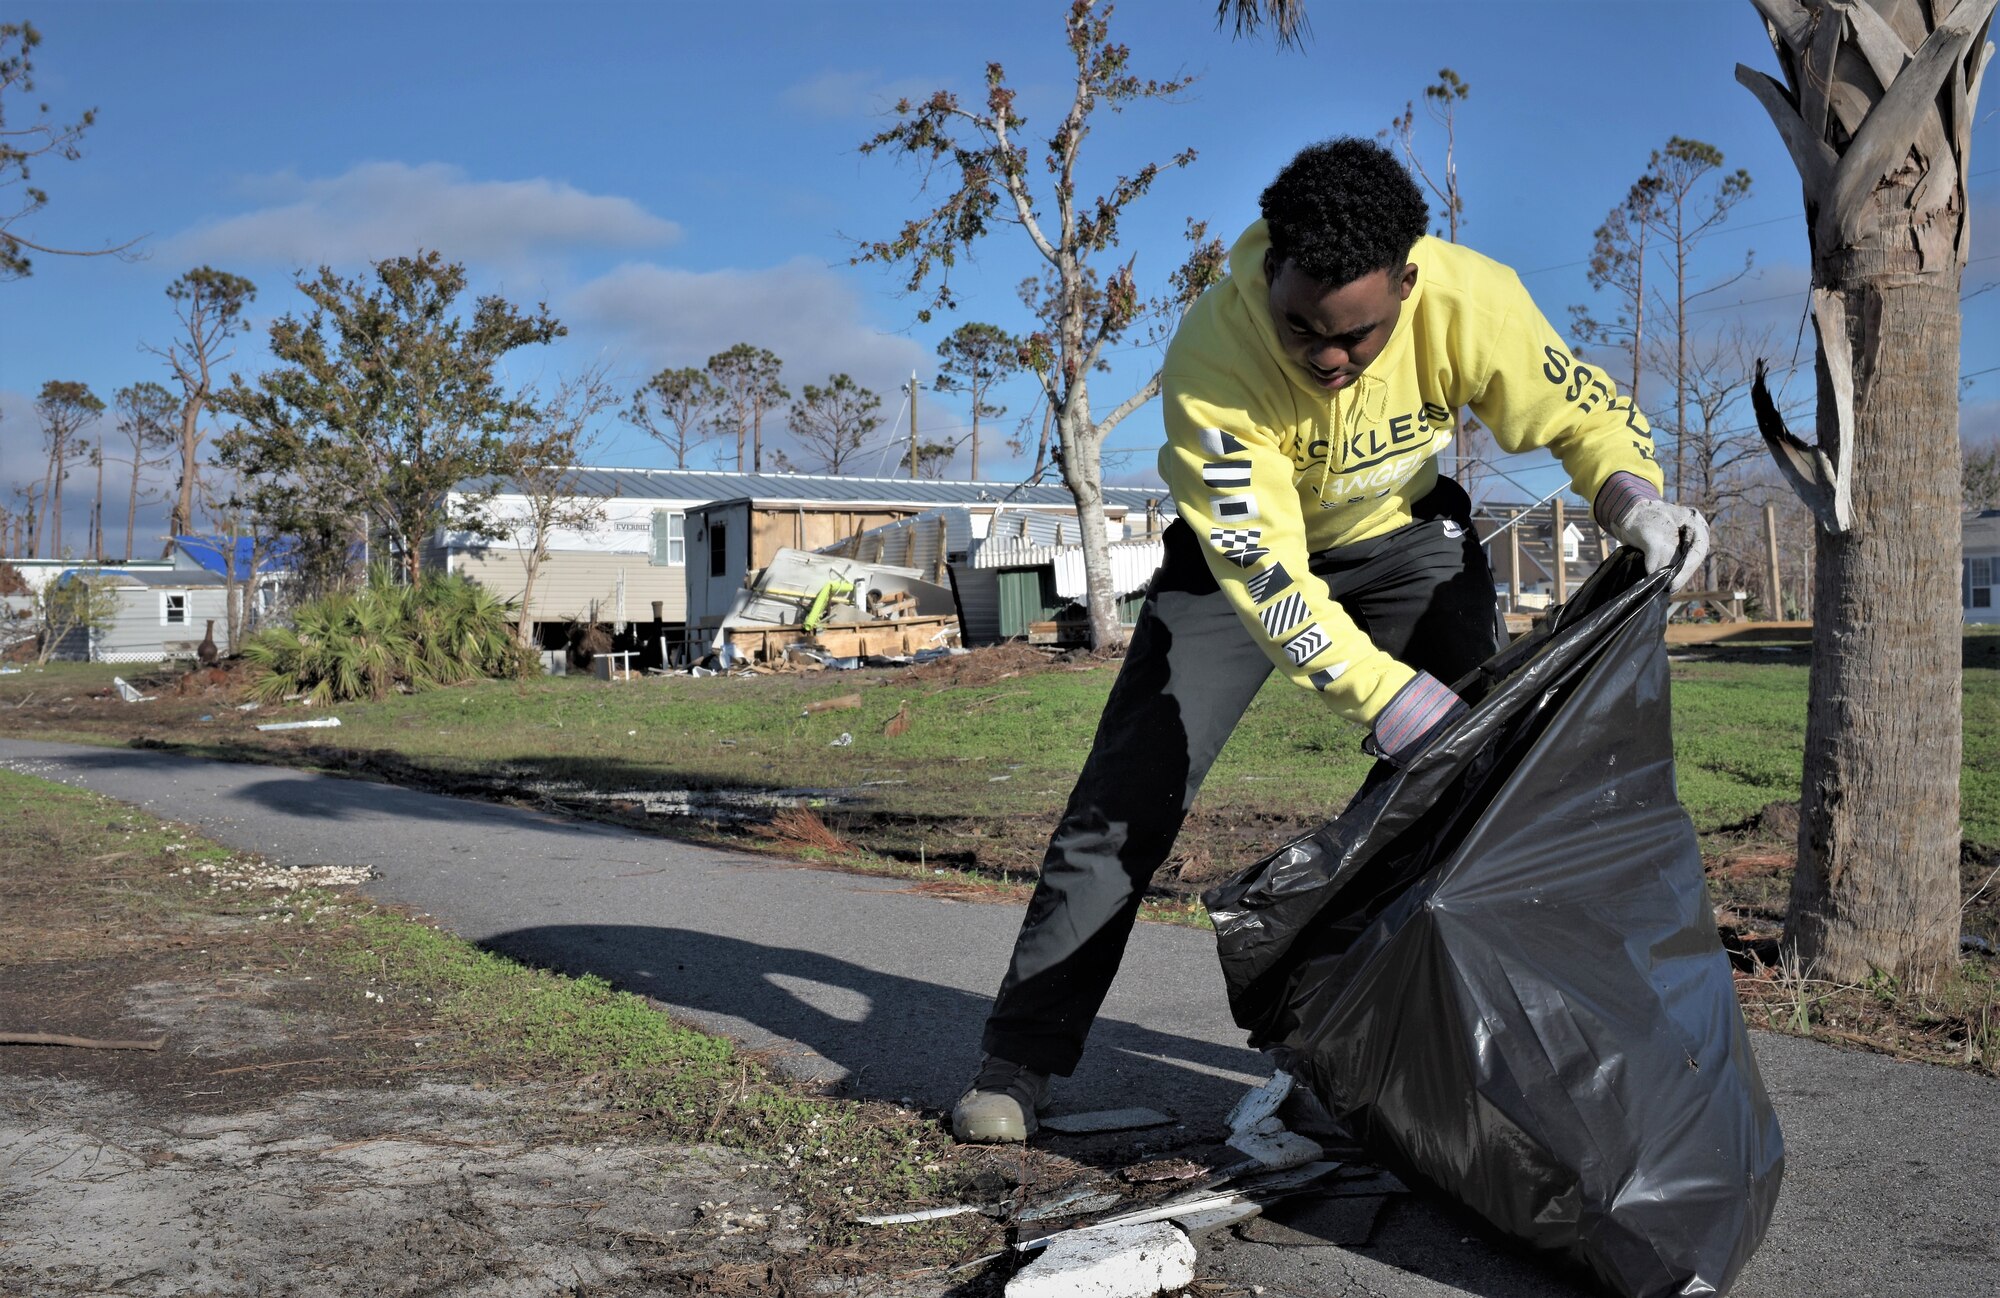 Airman 1st Class Tristain Blaney, 325th Force Support Squadron, Fitness Assessment Cell trainee, helps clean Under the Palms Park in Mexico Beach, Fla., Dec. 16, 2018. Thirty nine volunteers from Tyndall and Eglin Air Force Bases came together to help clean Mexico Beach, one of the communities hit the hardest by Hurricane Michael.  The volunteers were able to clean up more than 40 cubic yards of debris within four hours. (U.S. Air Force photo by Tech. Sgt. Sara Keller)